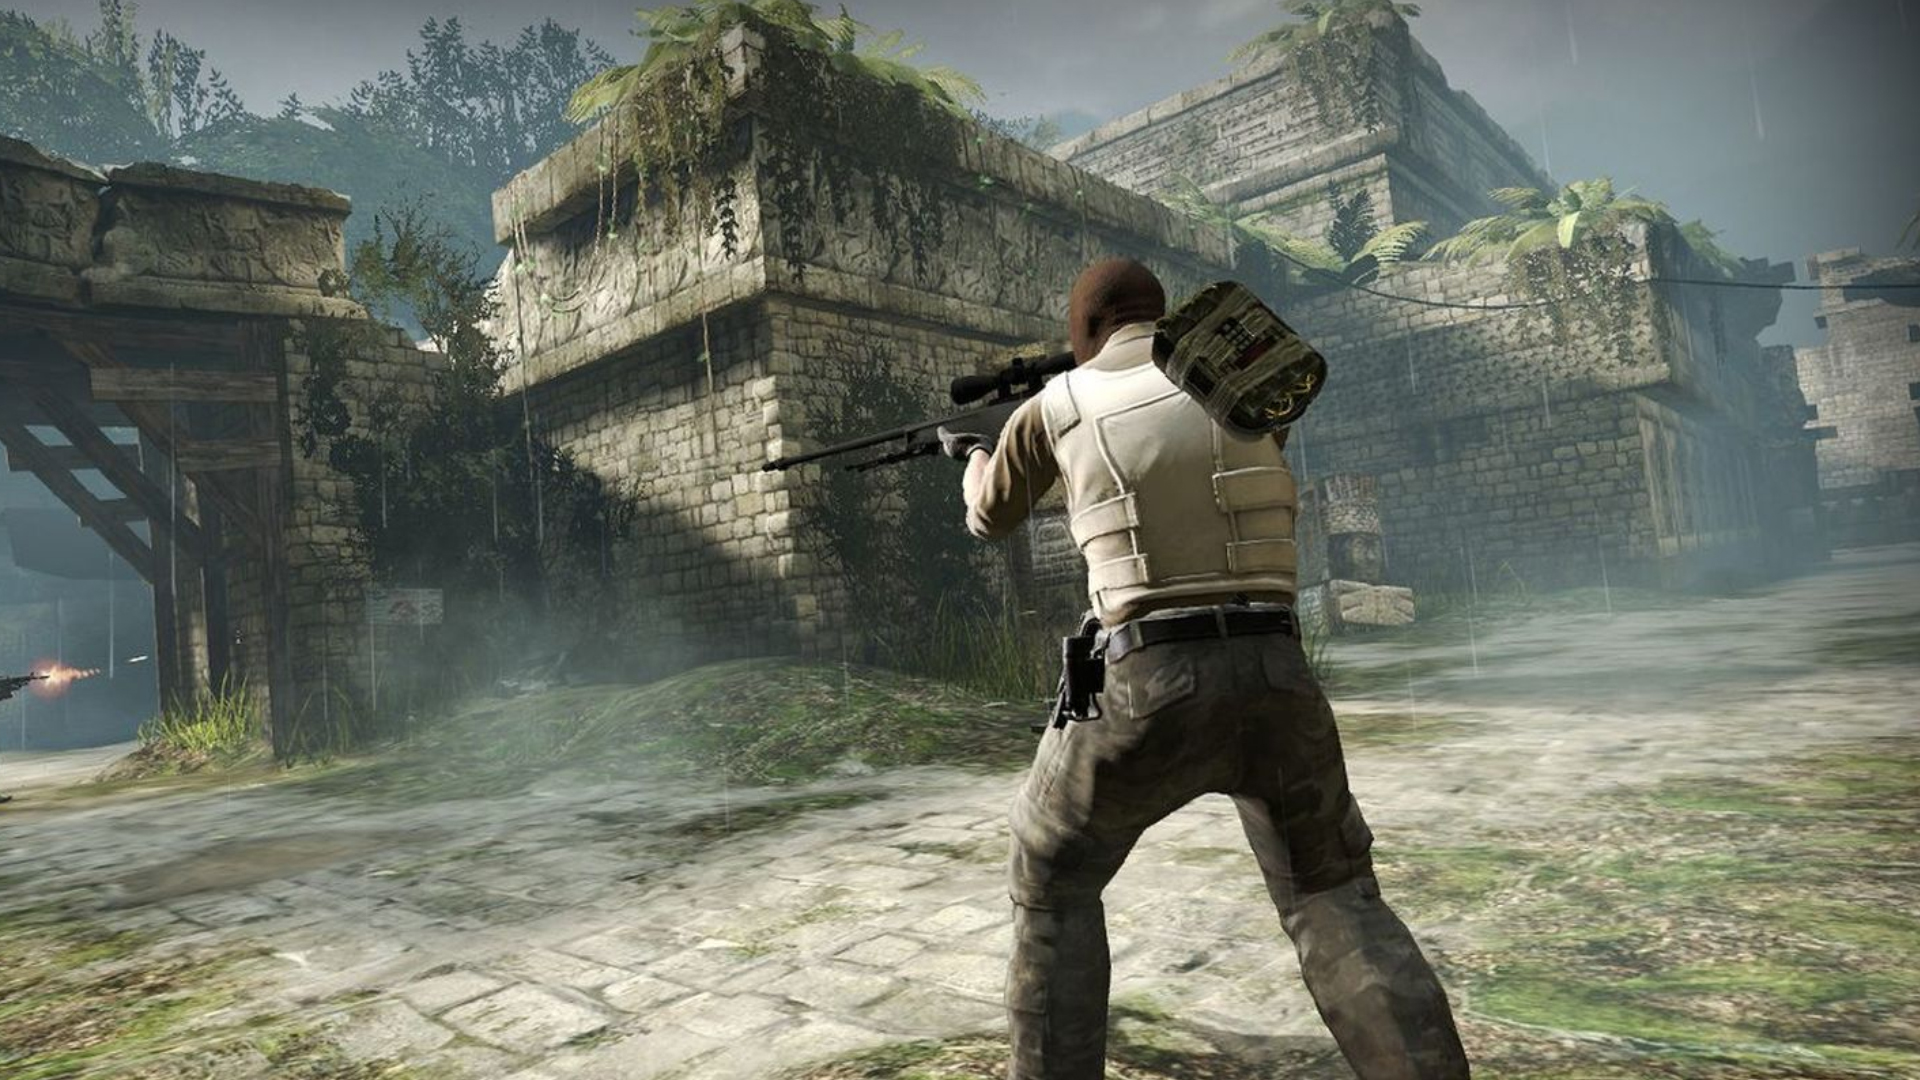 Screenshot for the game Counter-Strike: Global Offensive (CS: GO) [New Version] on PC